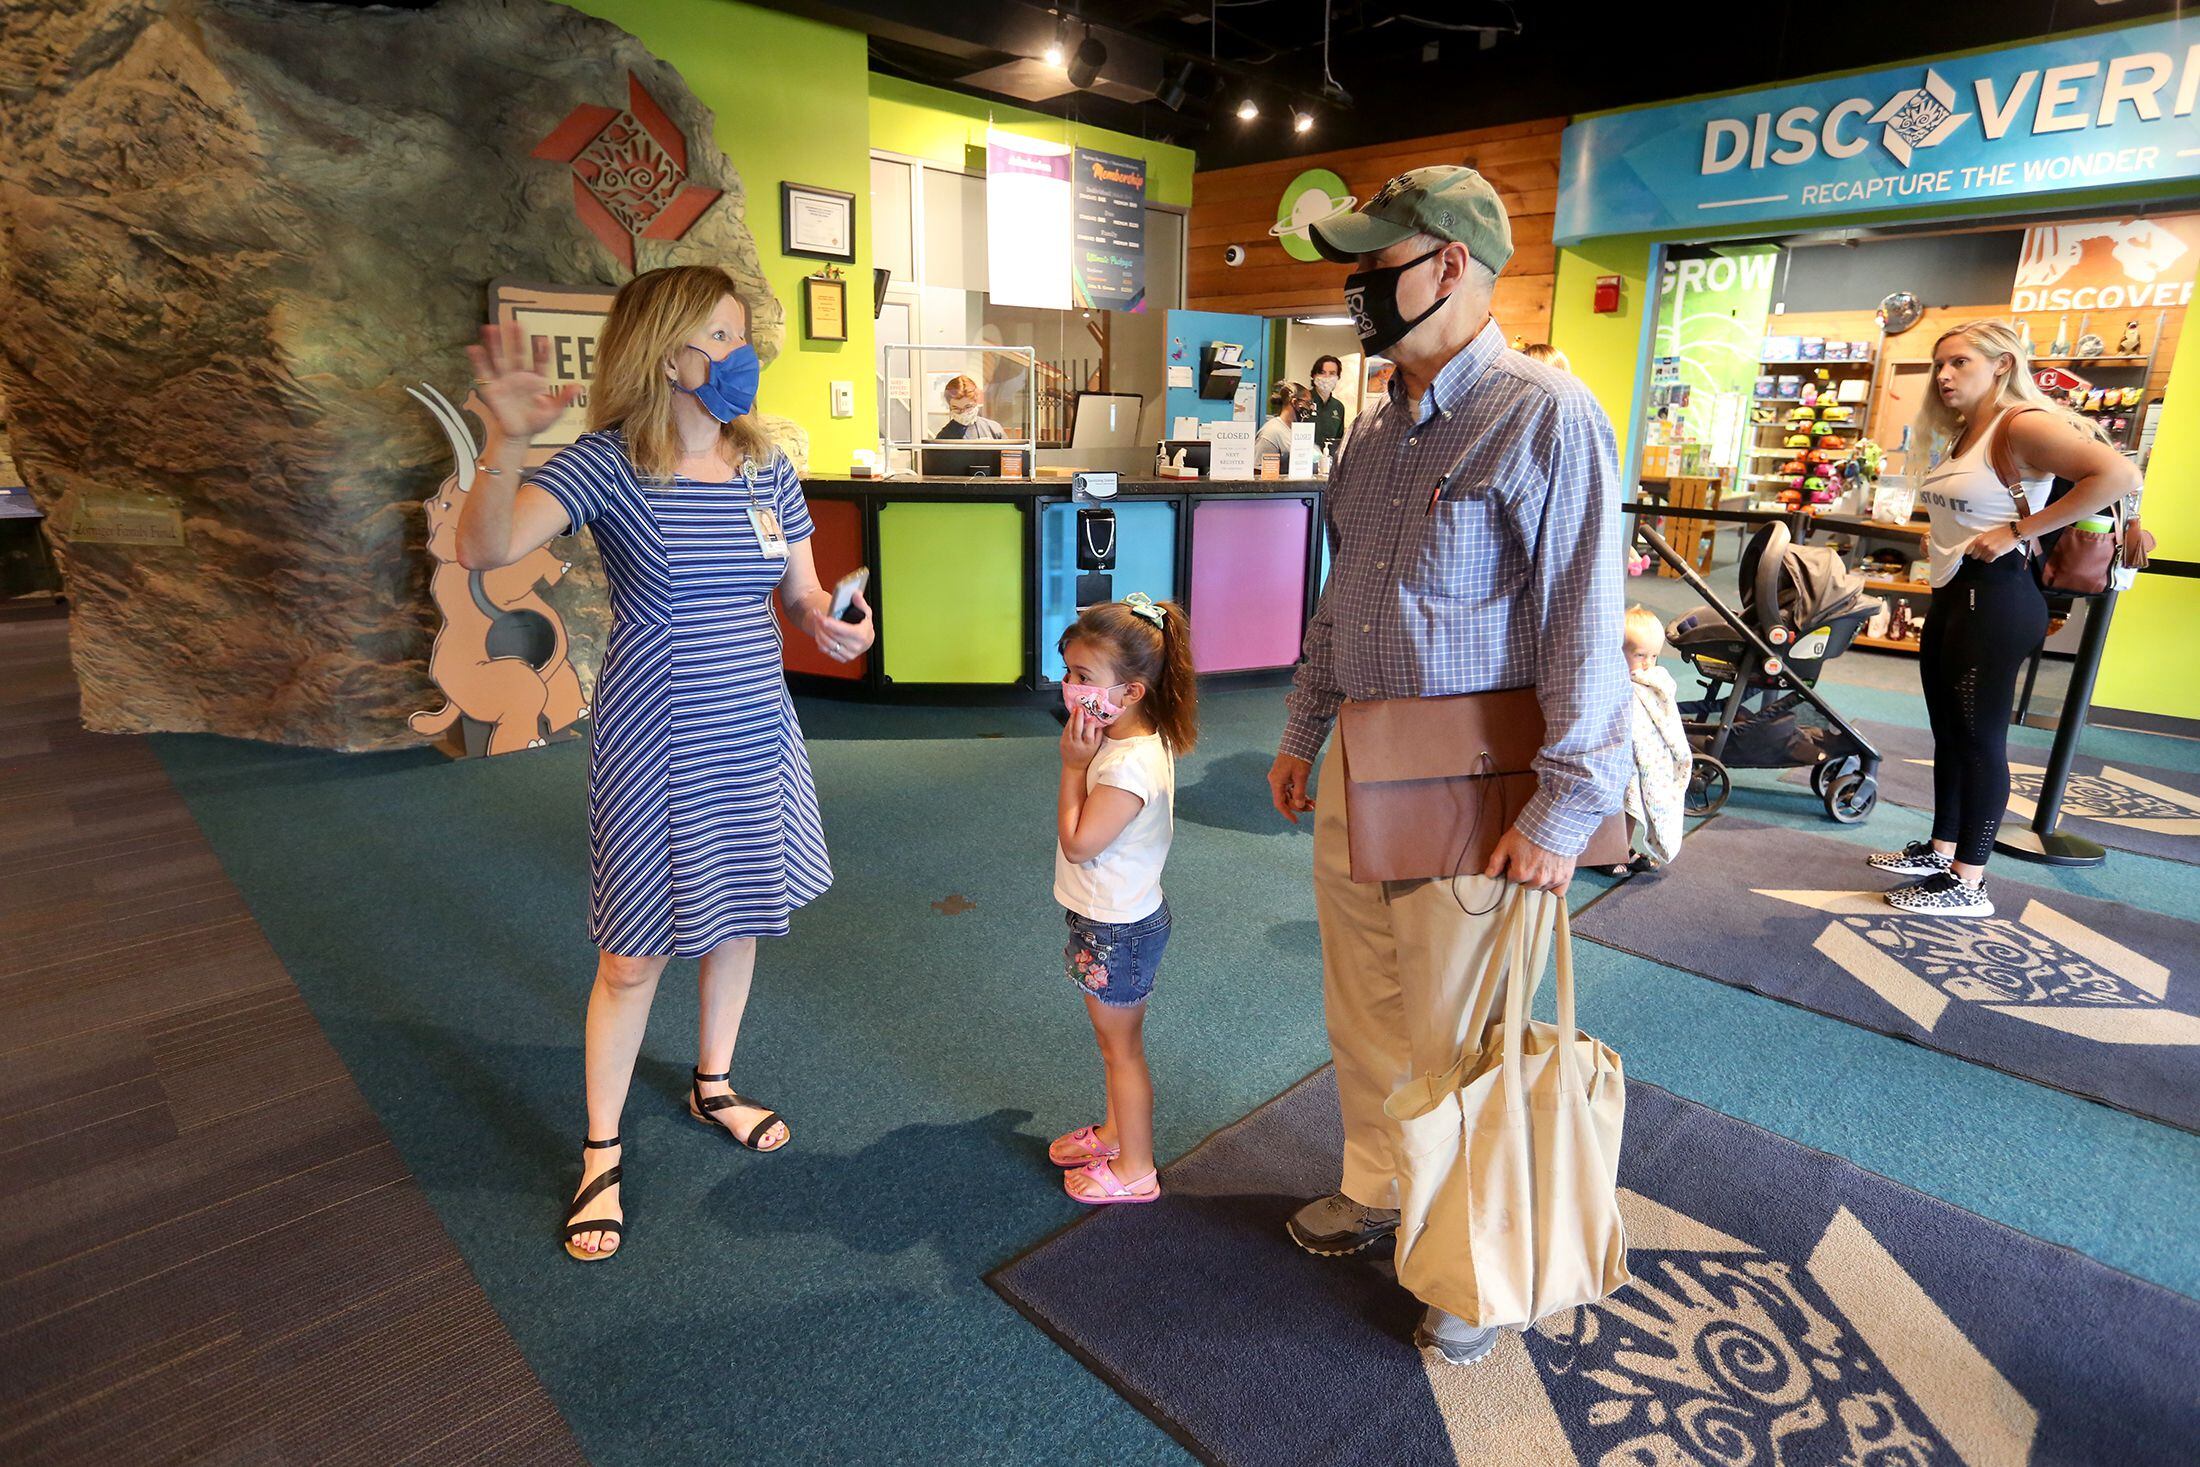 Photos: Boonshoft Museum Of Discovery In Dayton Reopens